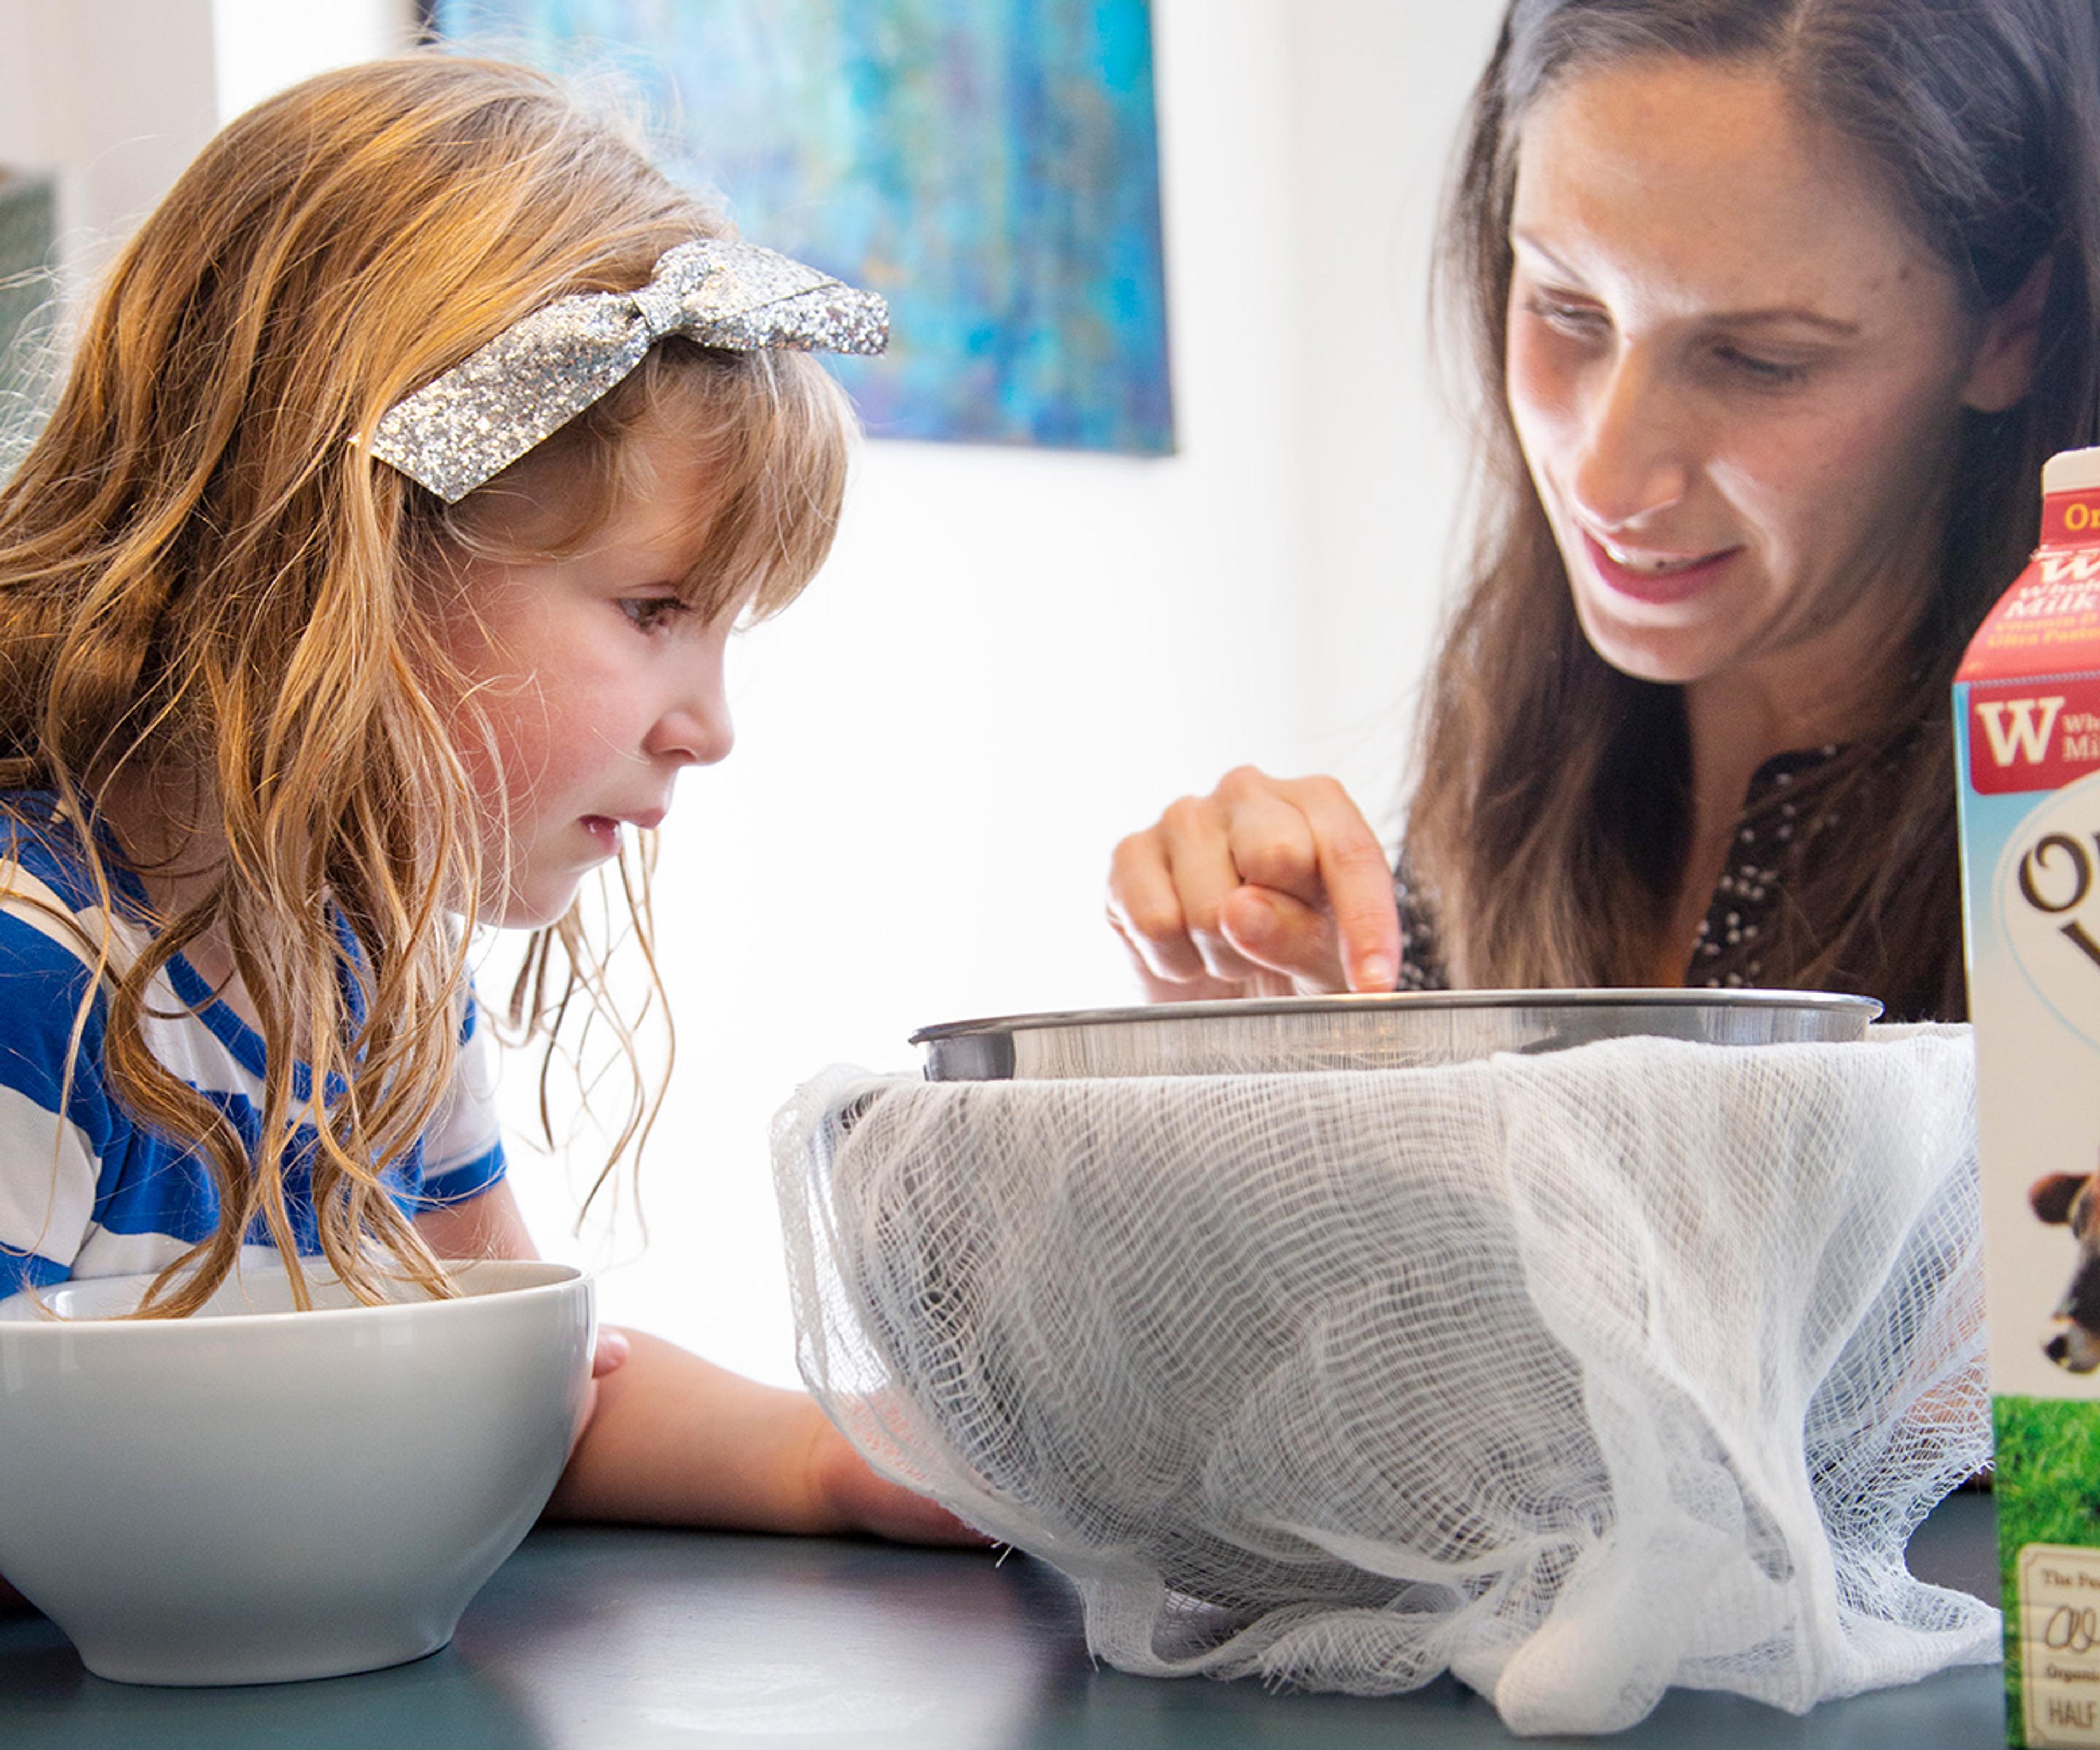 Lauren Manaker and her daughter make homemade ricotta cheese. Photo by Jackie Stofsick.